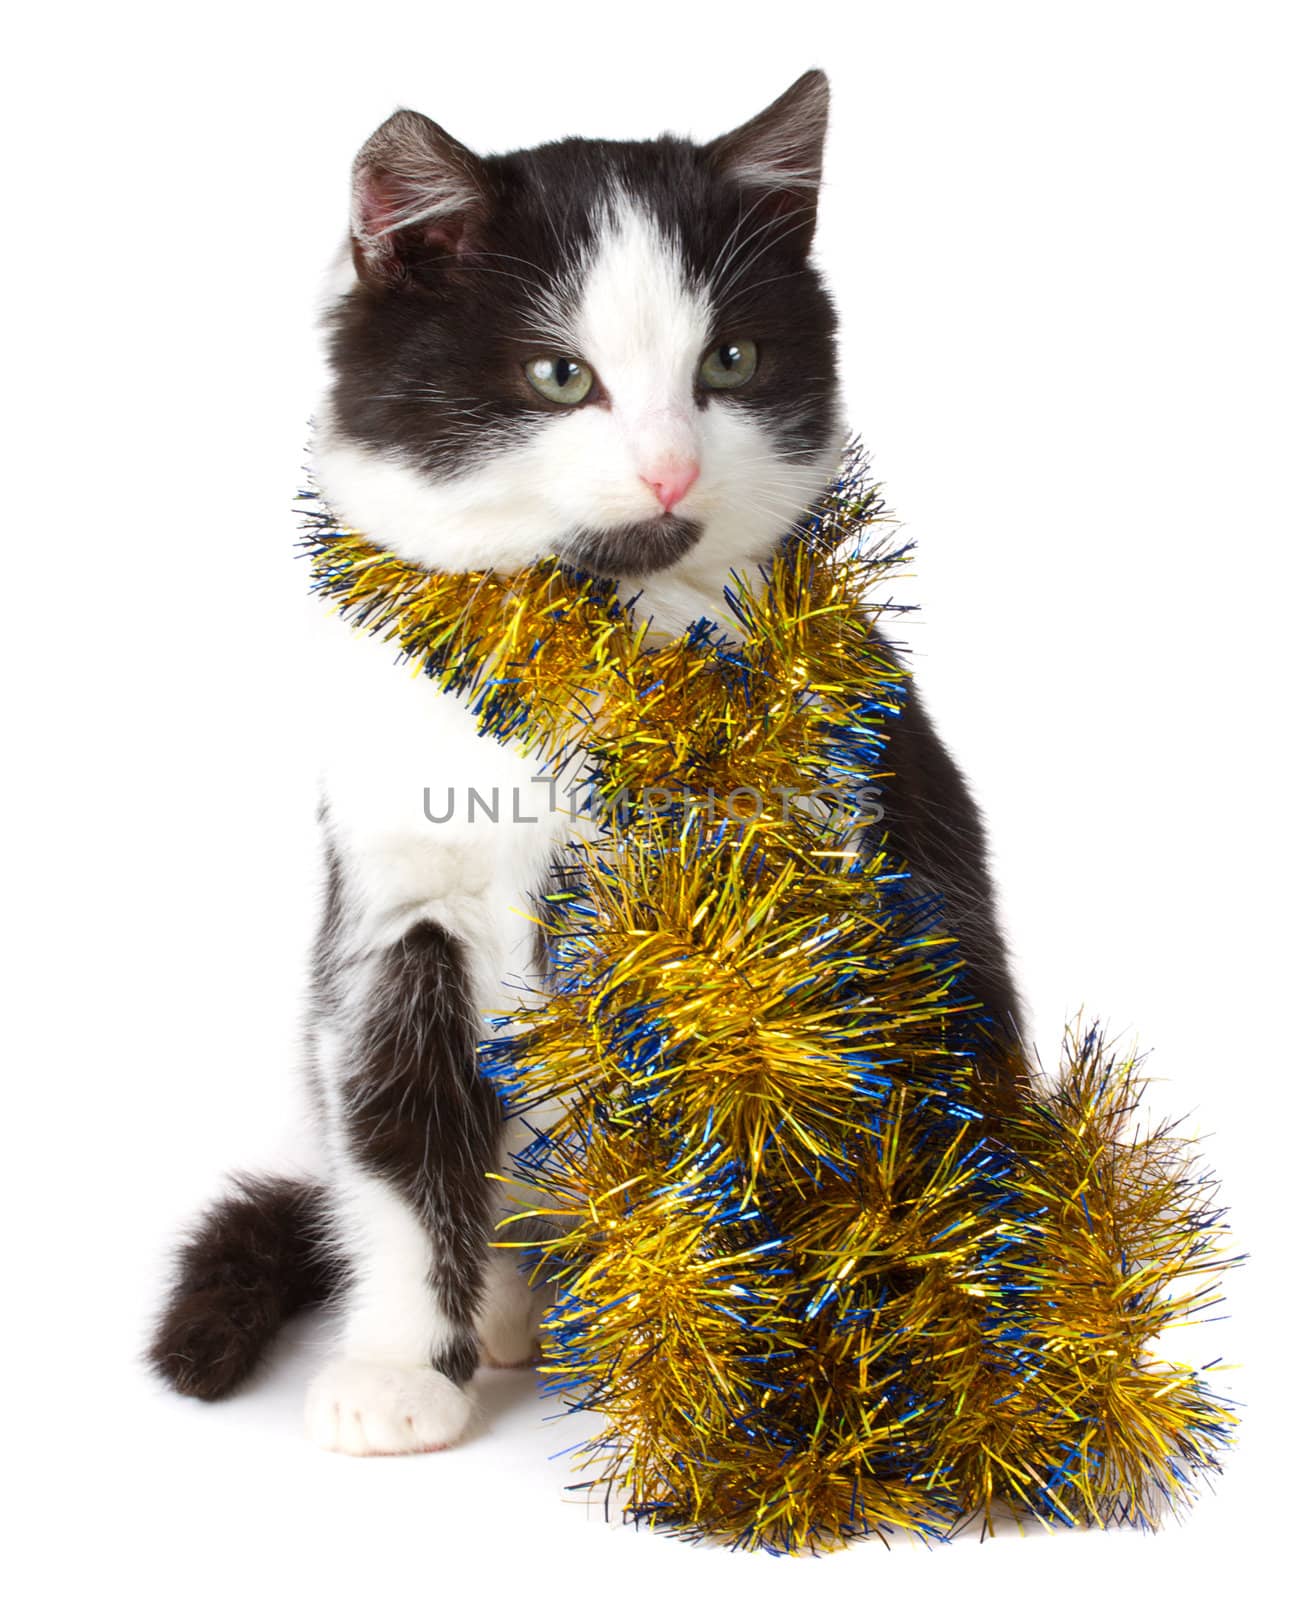 close-up kitten and christmas decorations, isolated on white